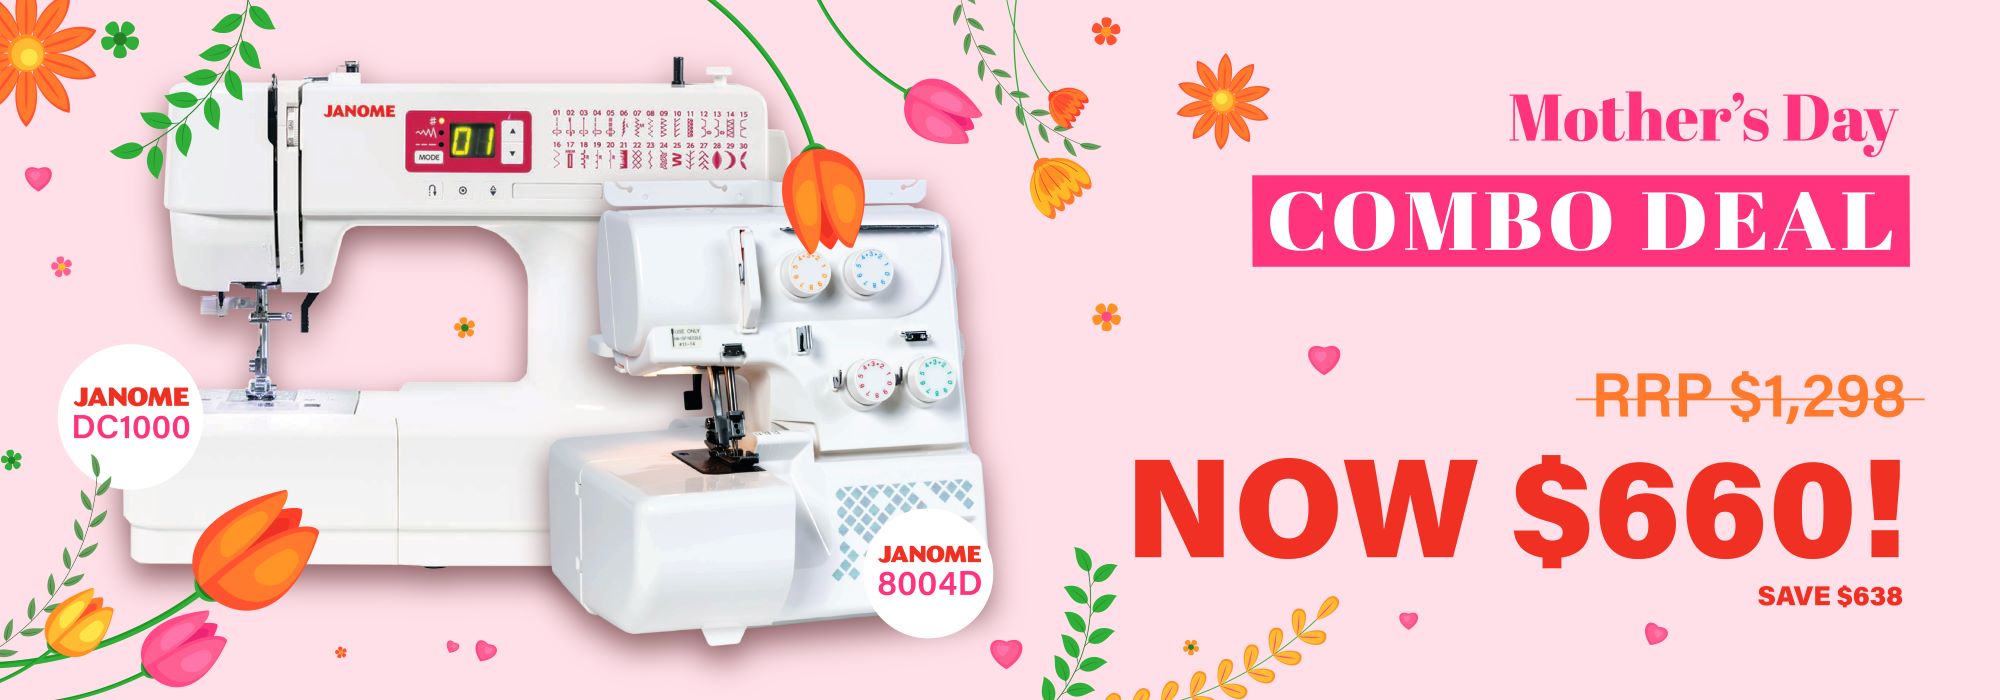 Janome Combo Deal 01